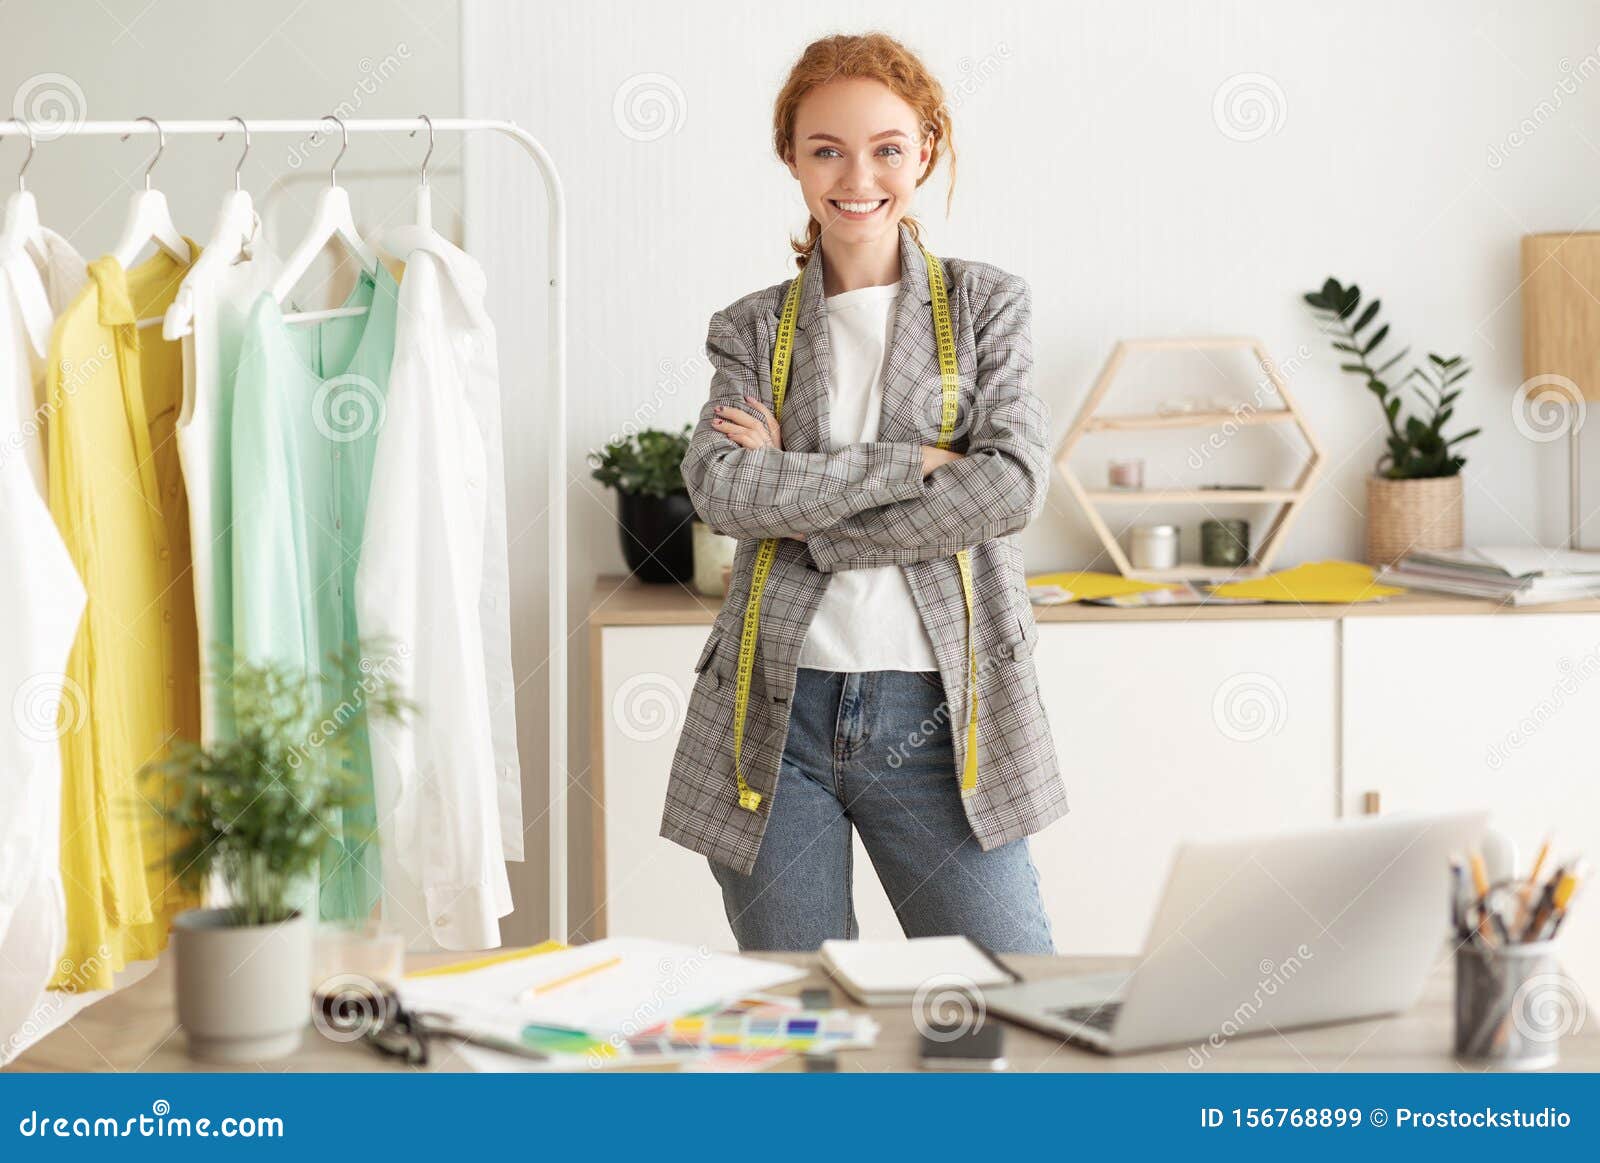 Talented Young Dressmaker Posing in Workshop, Free Space Stock Image ...